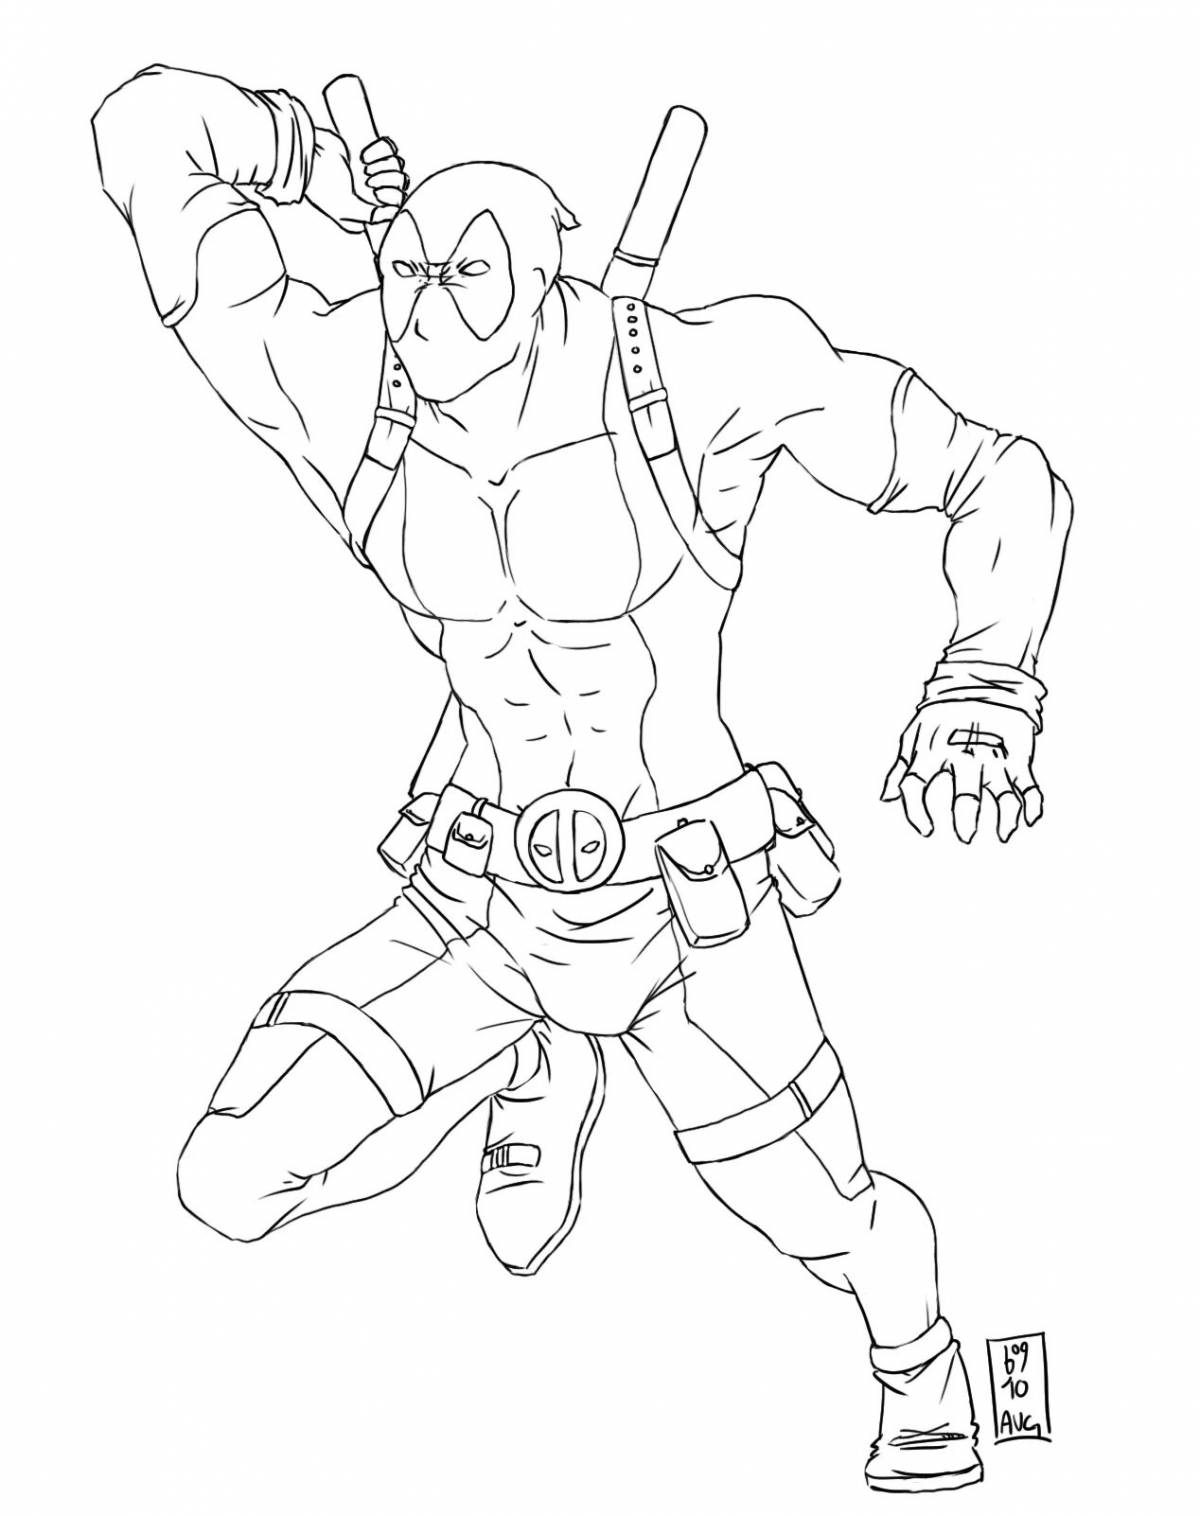 Amazing Deadpool and Spiderman Coloring Pages for Kids